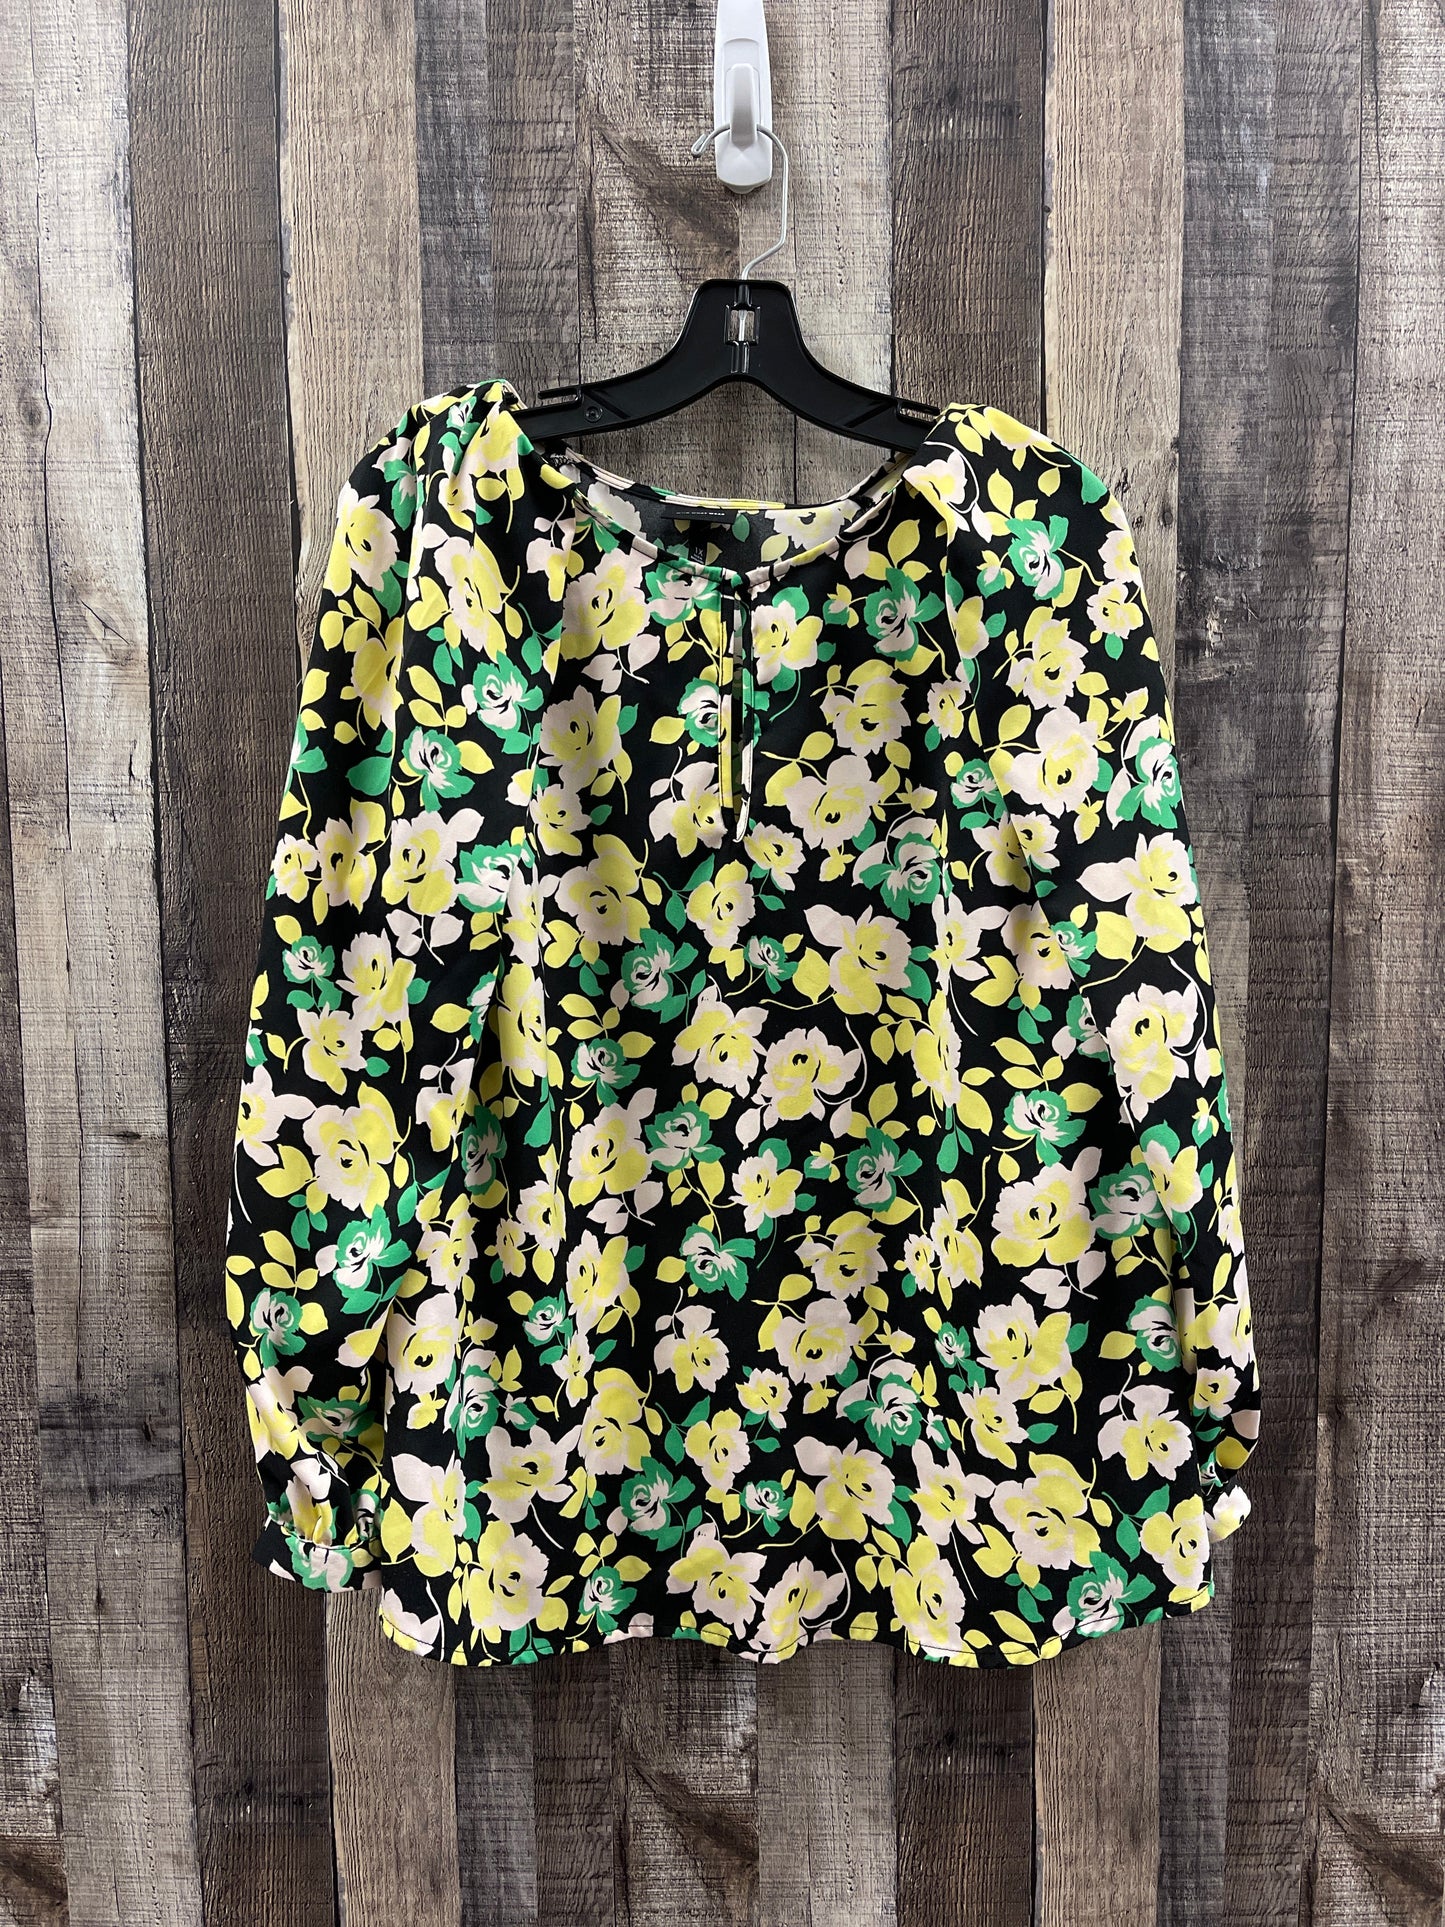 Floral Print Blouse Long Sleeve Who What Wear, Size 1x